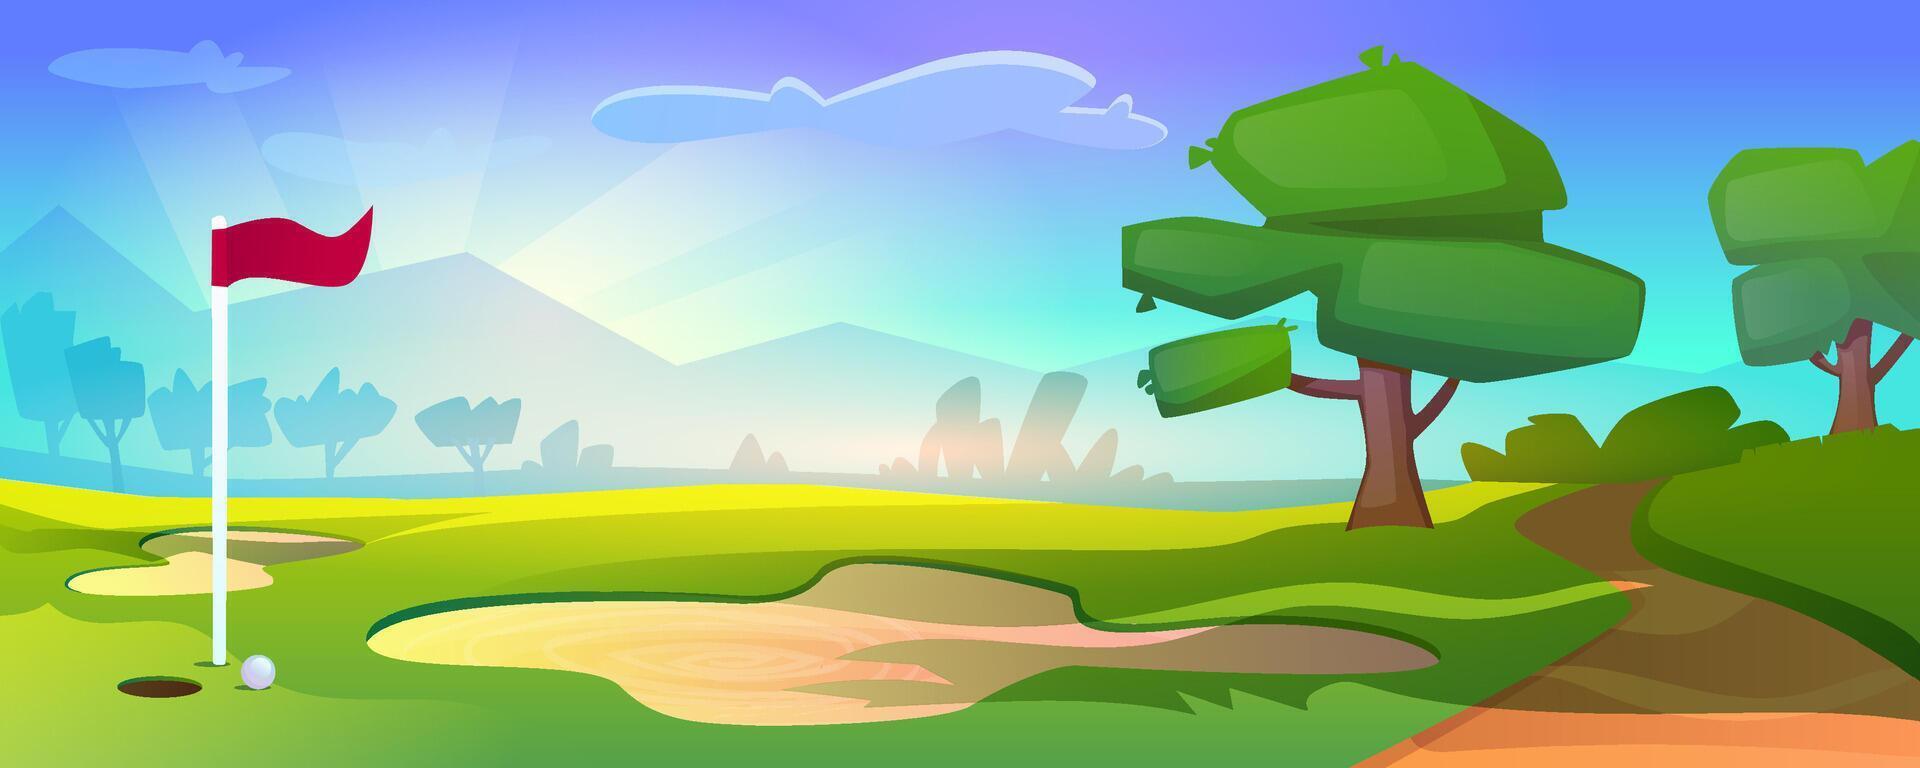 Empty golf course on nature landscape with red flag, white ball on grass, trees and blue cloudy sky. Countryside place of sport field for golf with sand bunker, green lawn cartoon illustration. vector